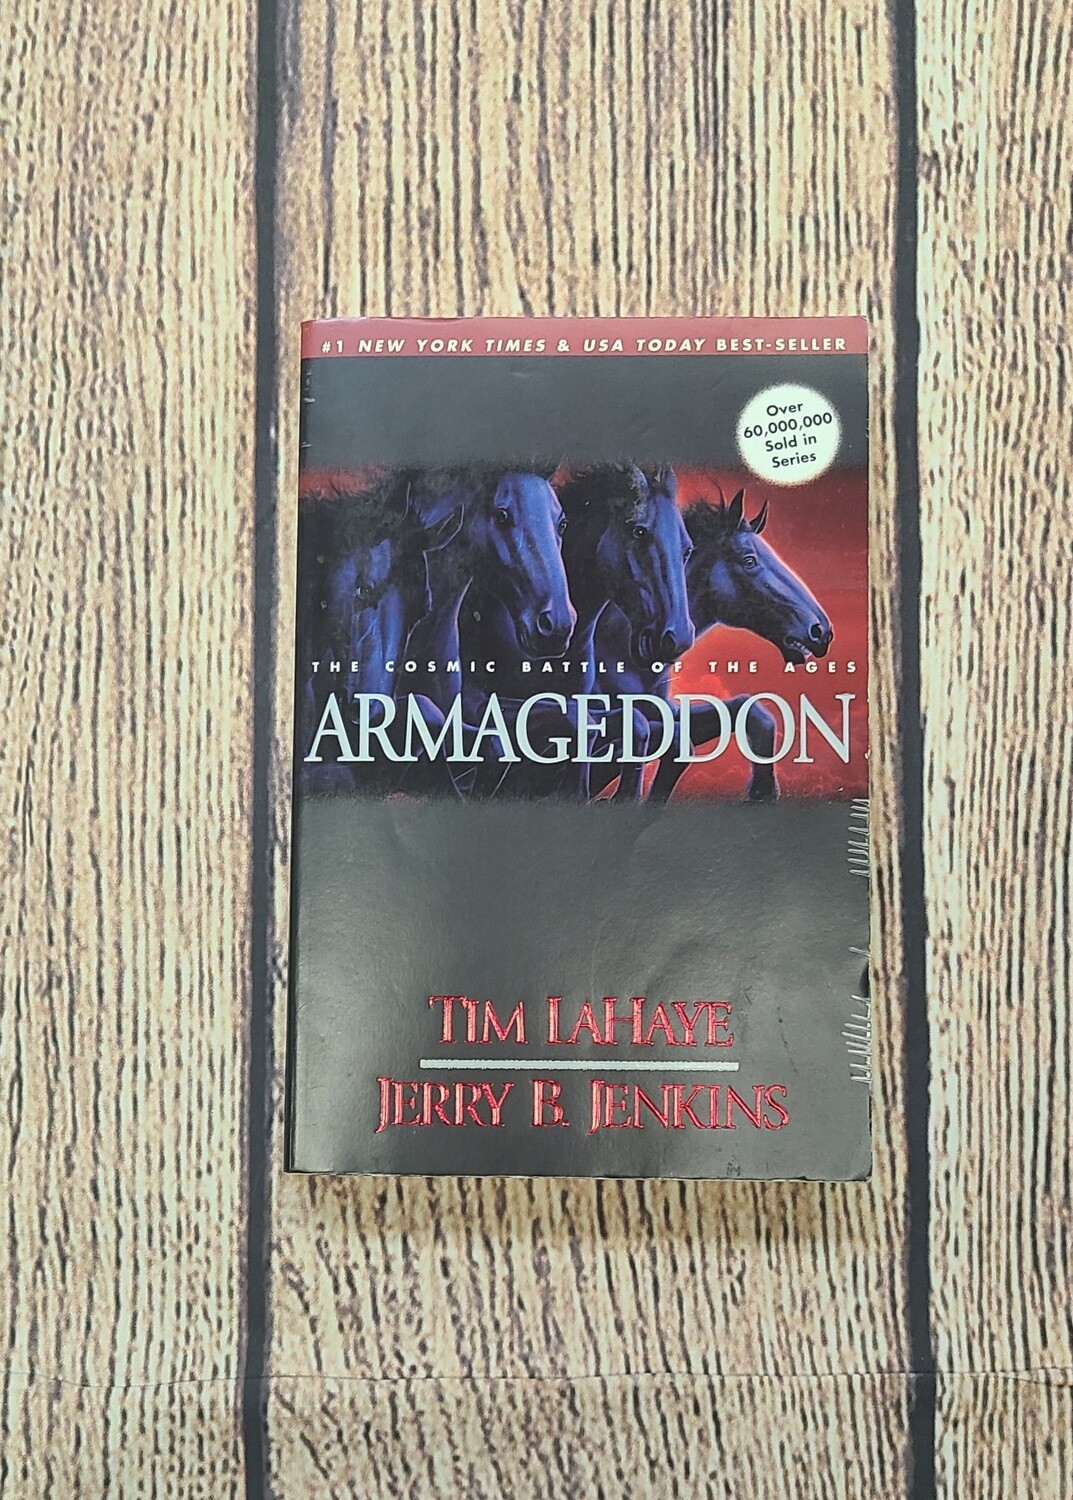 Armageddon: The Cosmic Battle of the Ages by Tim LaHaye and Jerry B. Jenkins - Paperback